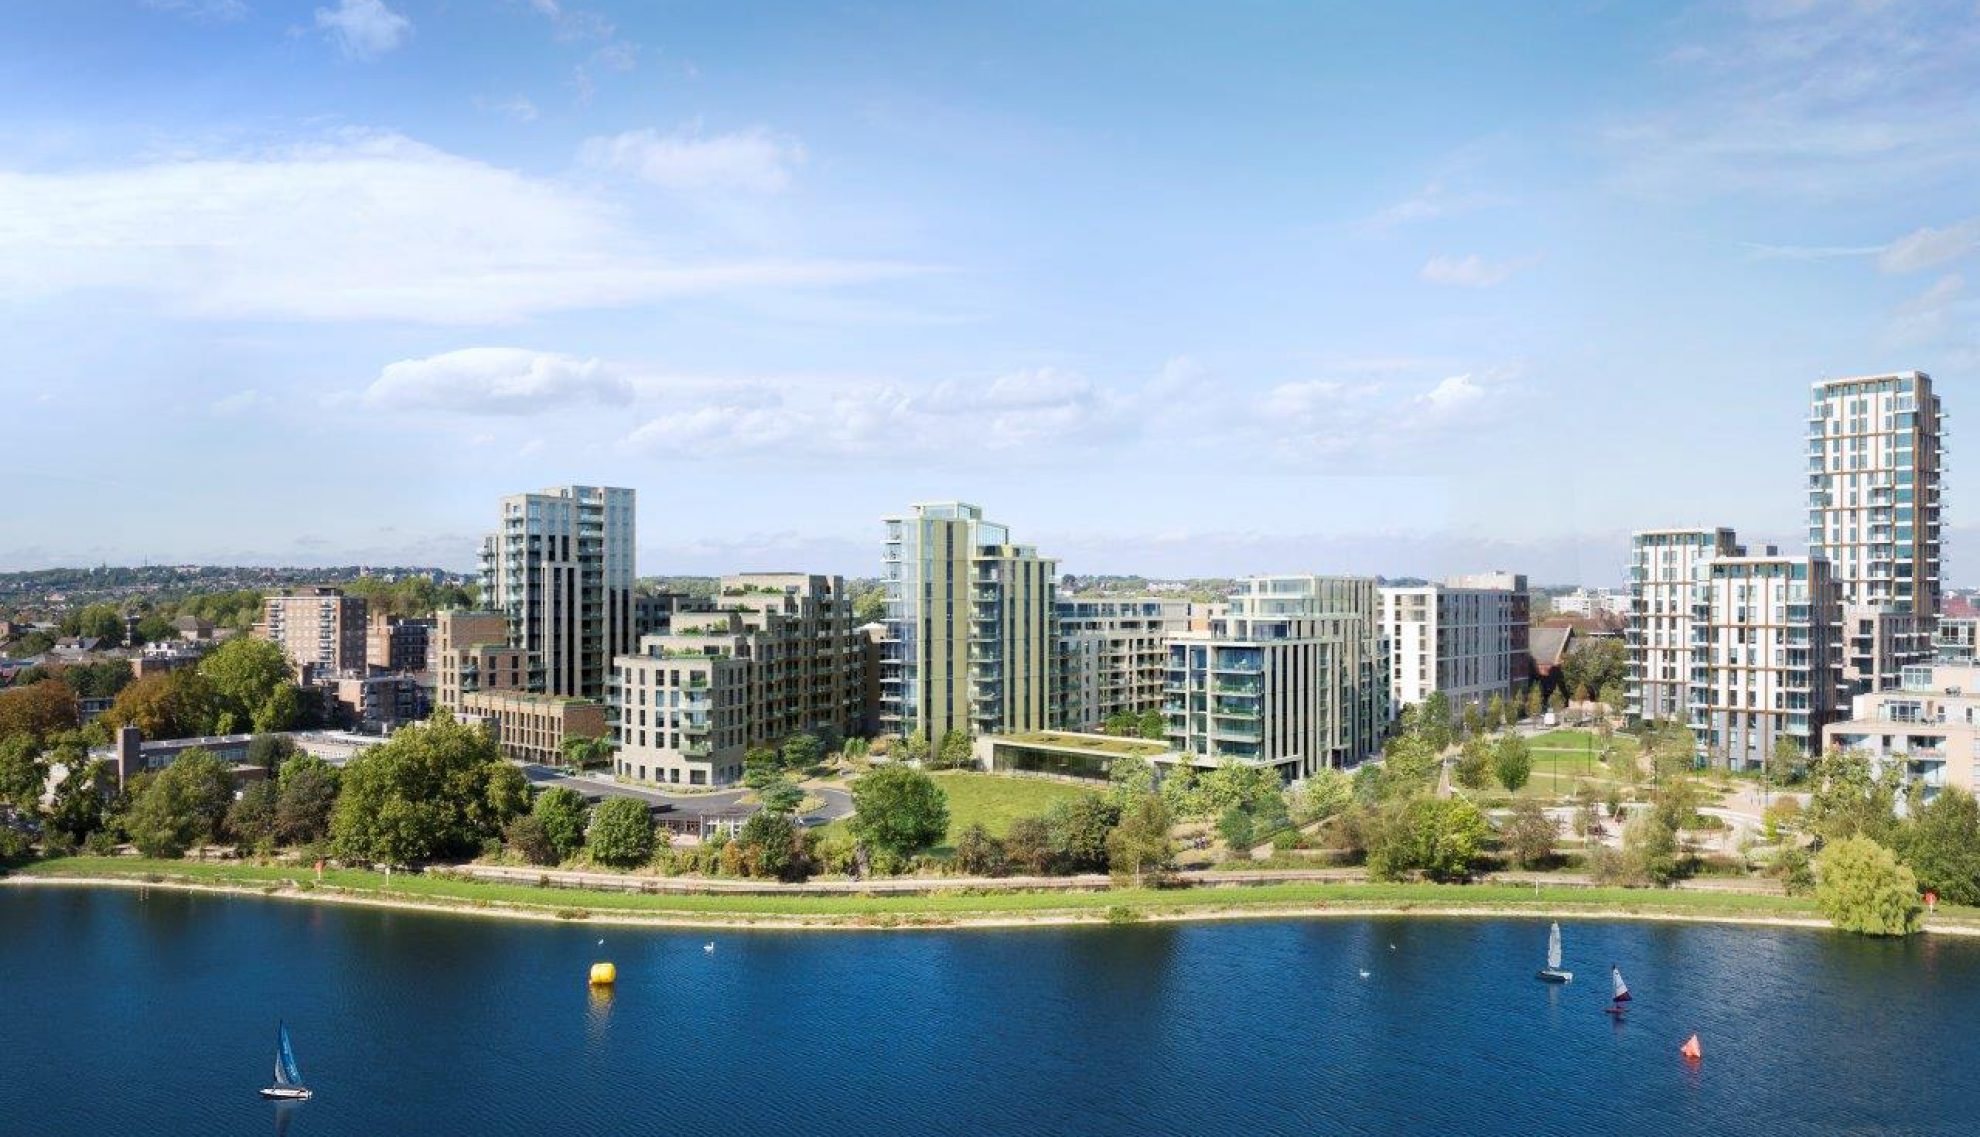 The Woodberry Down development in the N4 London postcode